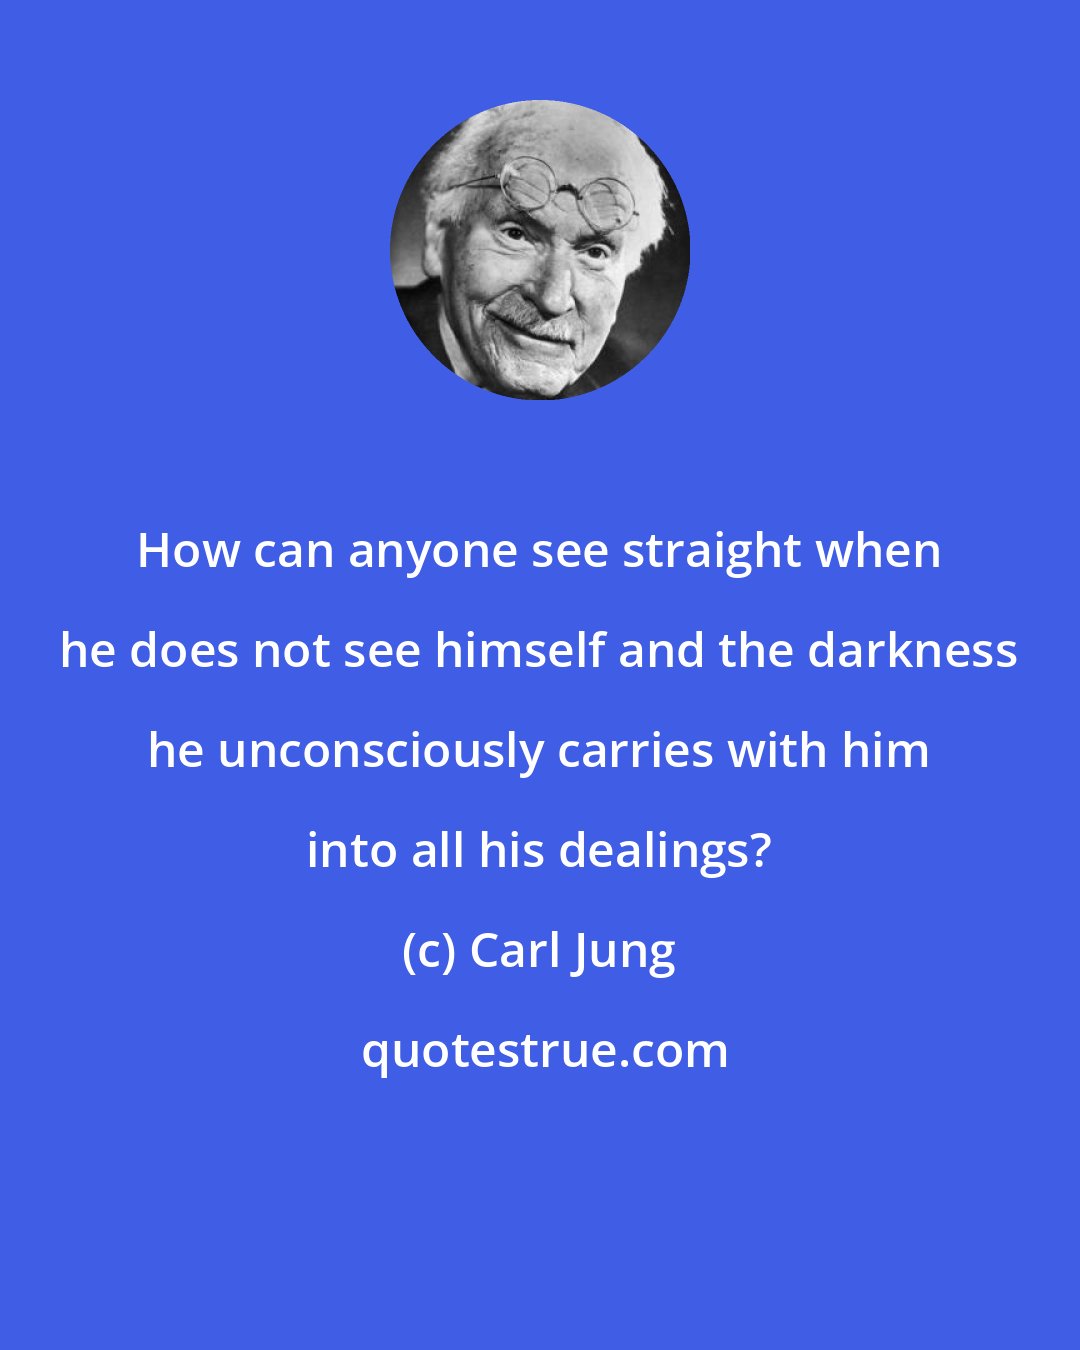 Carl Jung: How can anyone see straight when he does not see himself and the darkness he unconsciously carries with him into all his dealings?